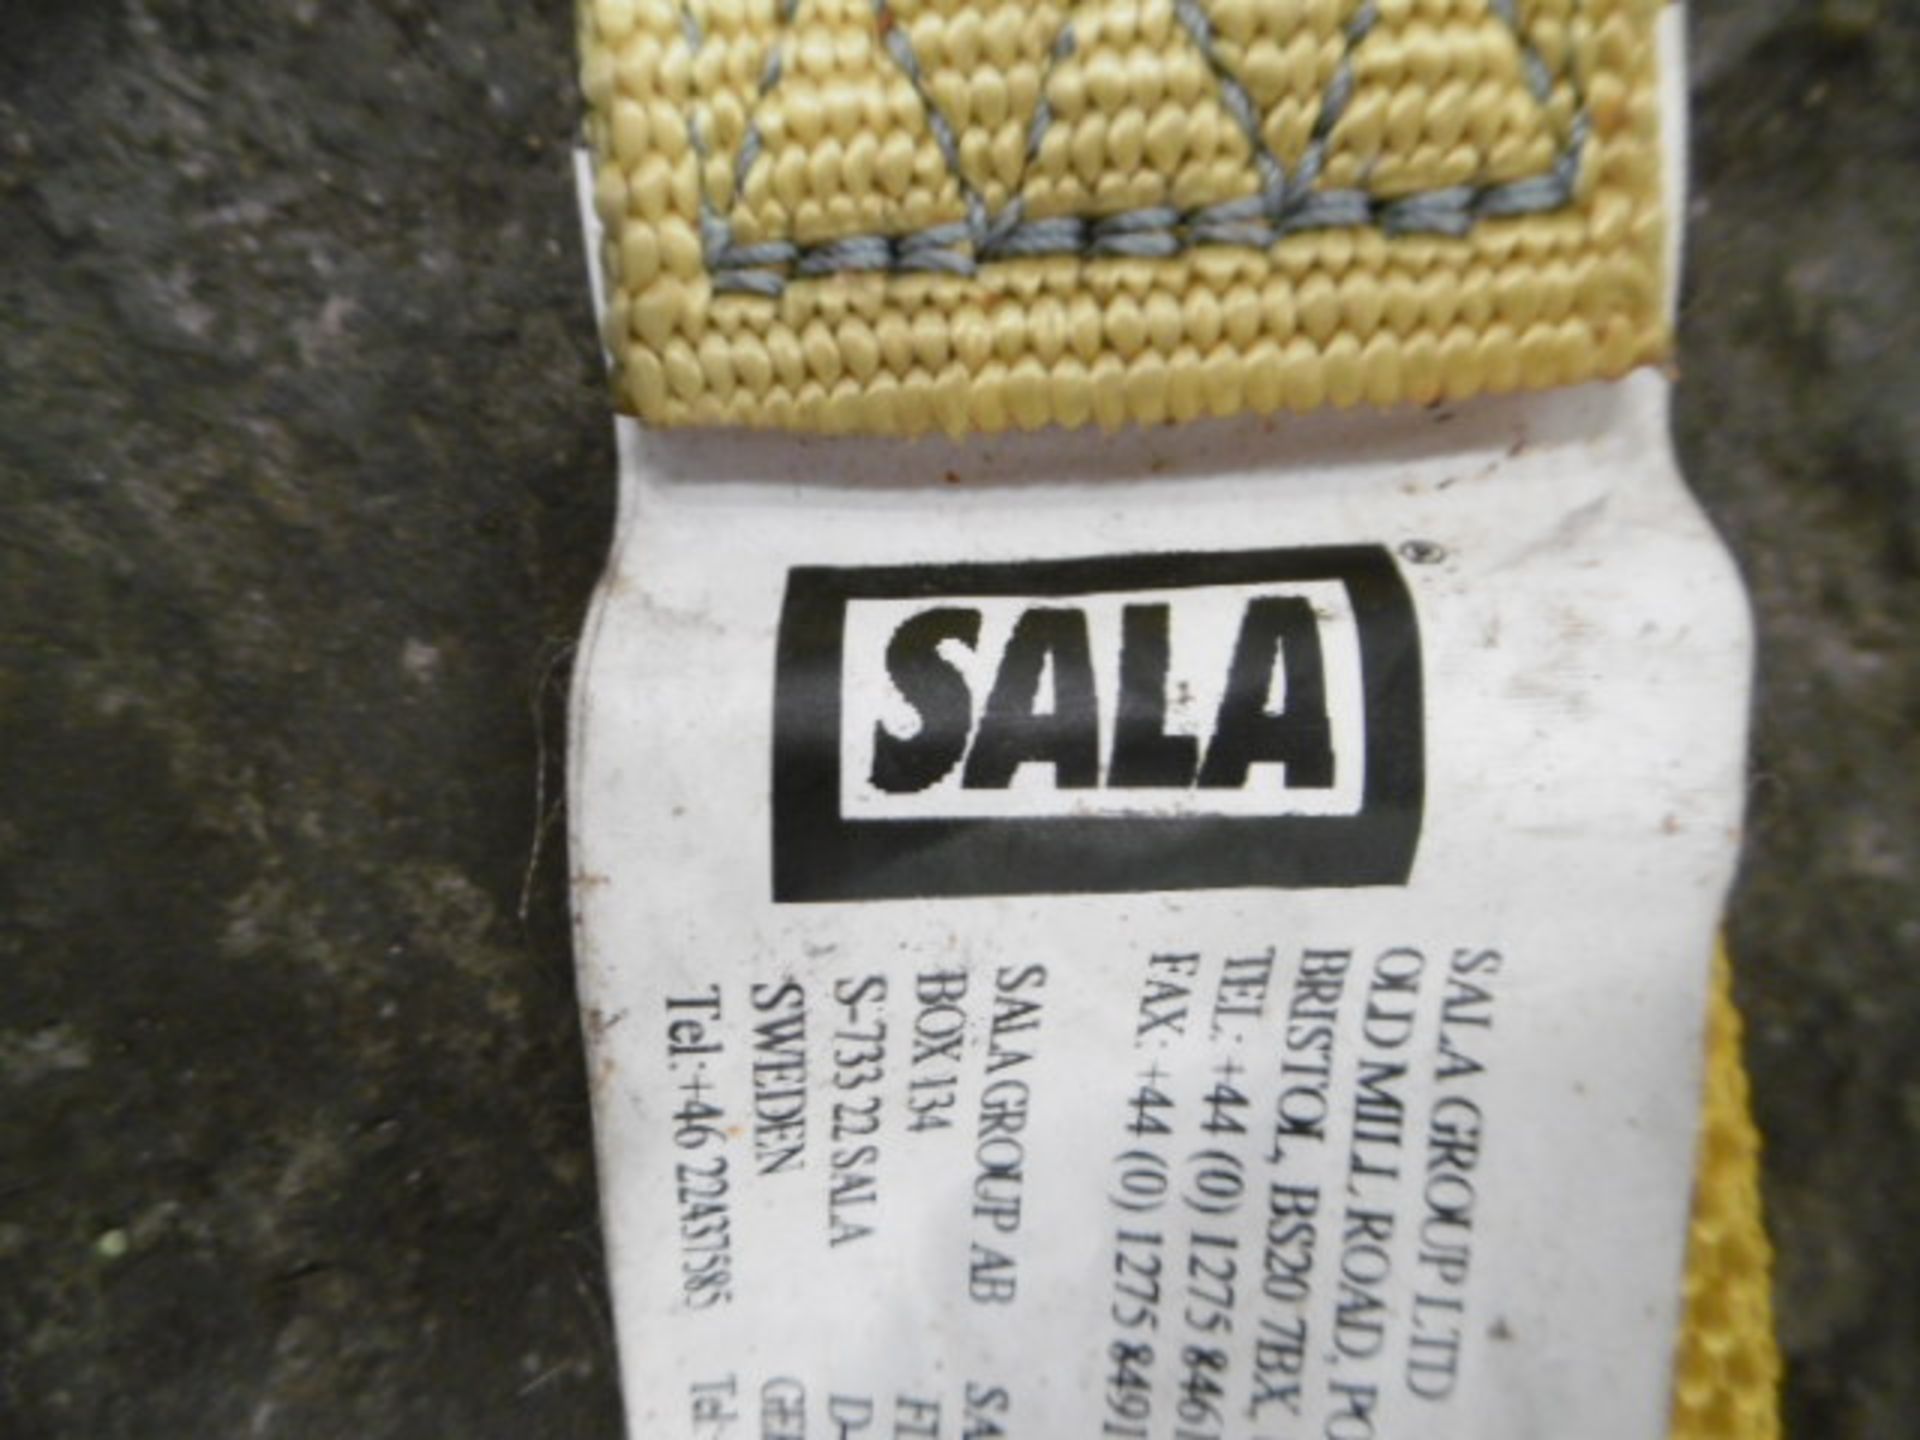 5 x Sala N-100 Sure Fit Harnesses - Image 3 of 4